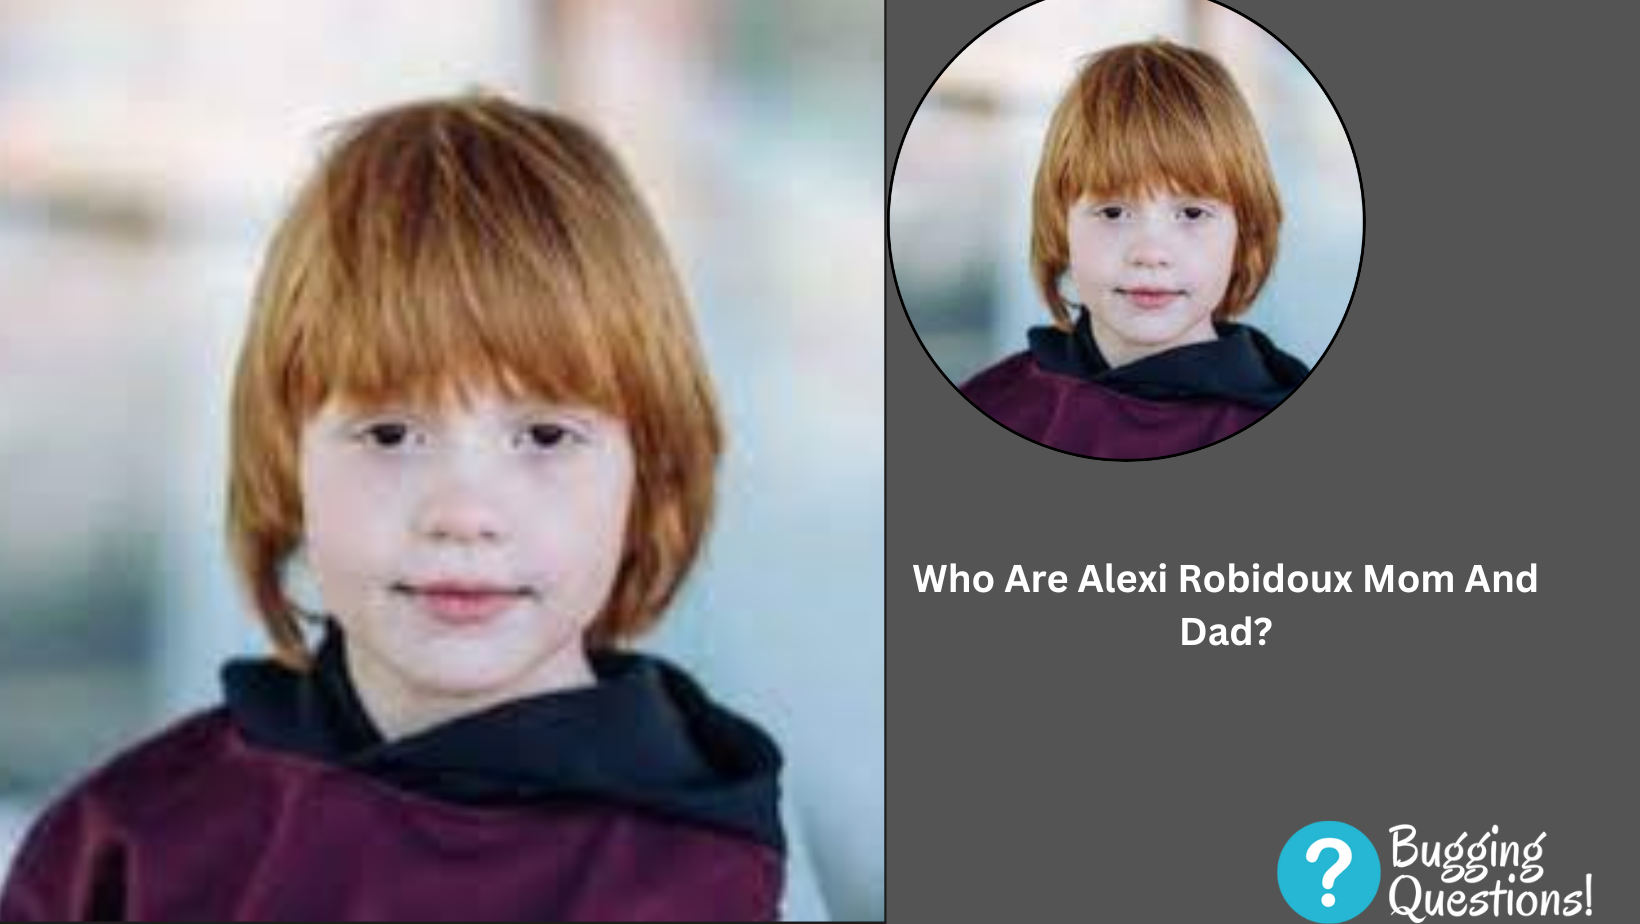 Who Are Alexi Robidoux Mom And Dad?